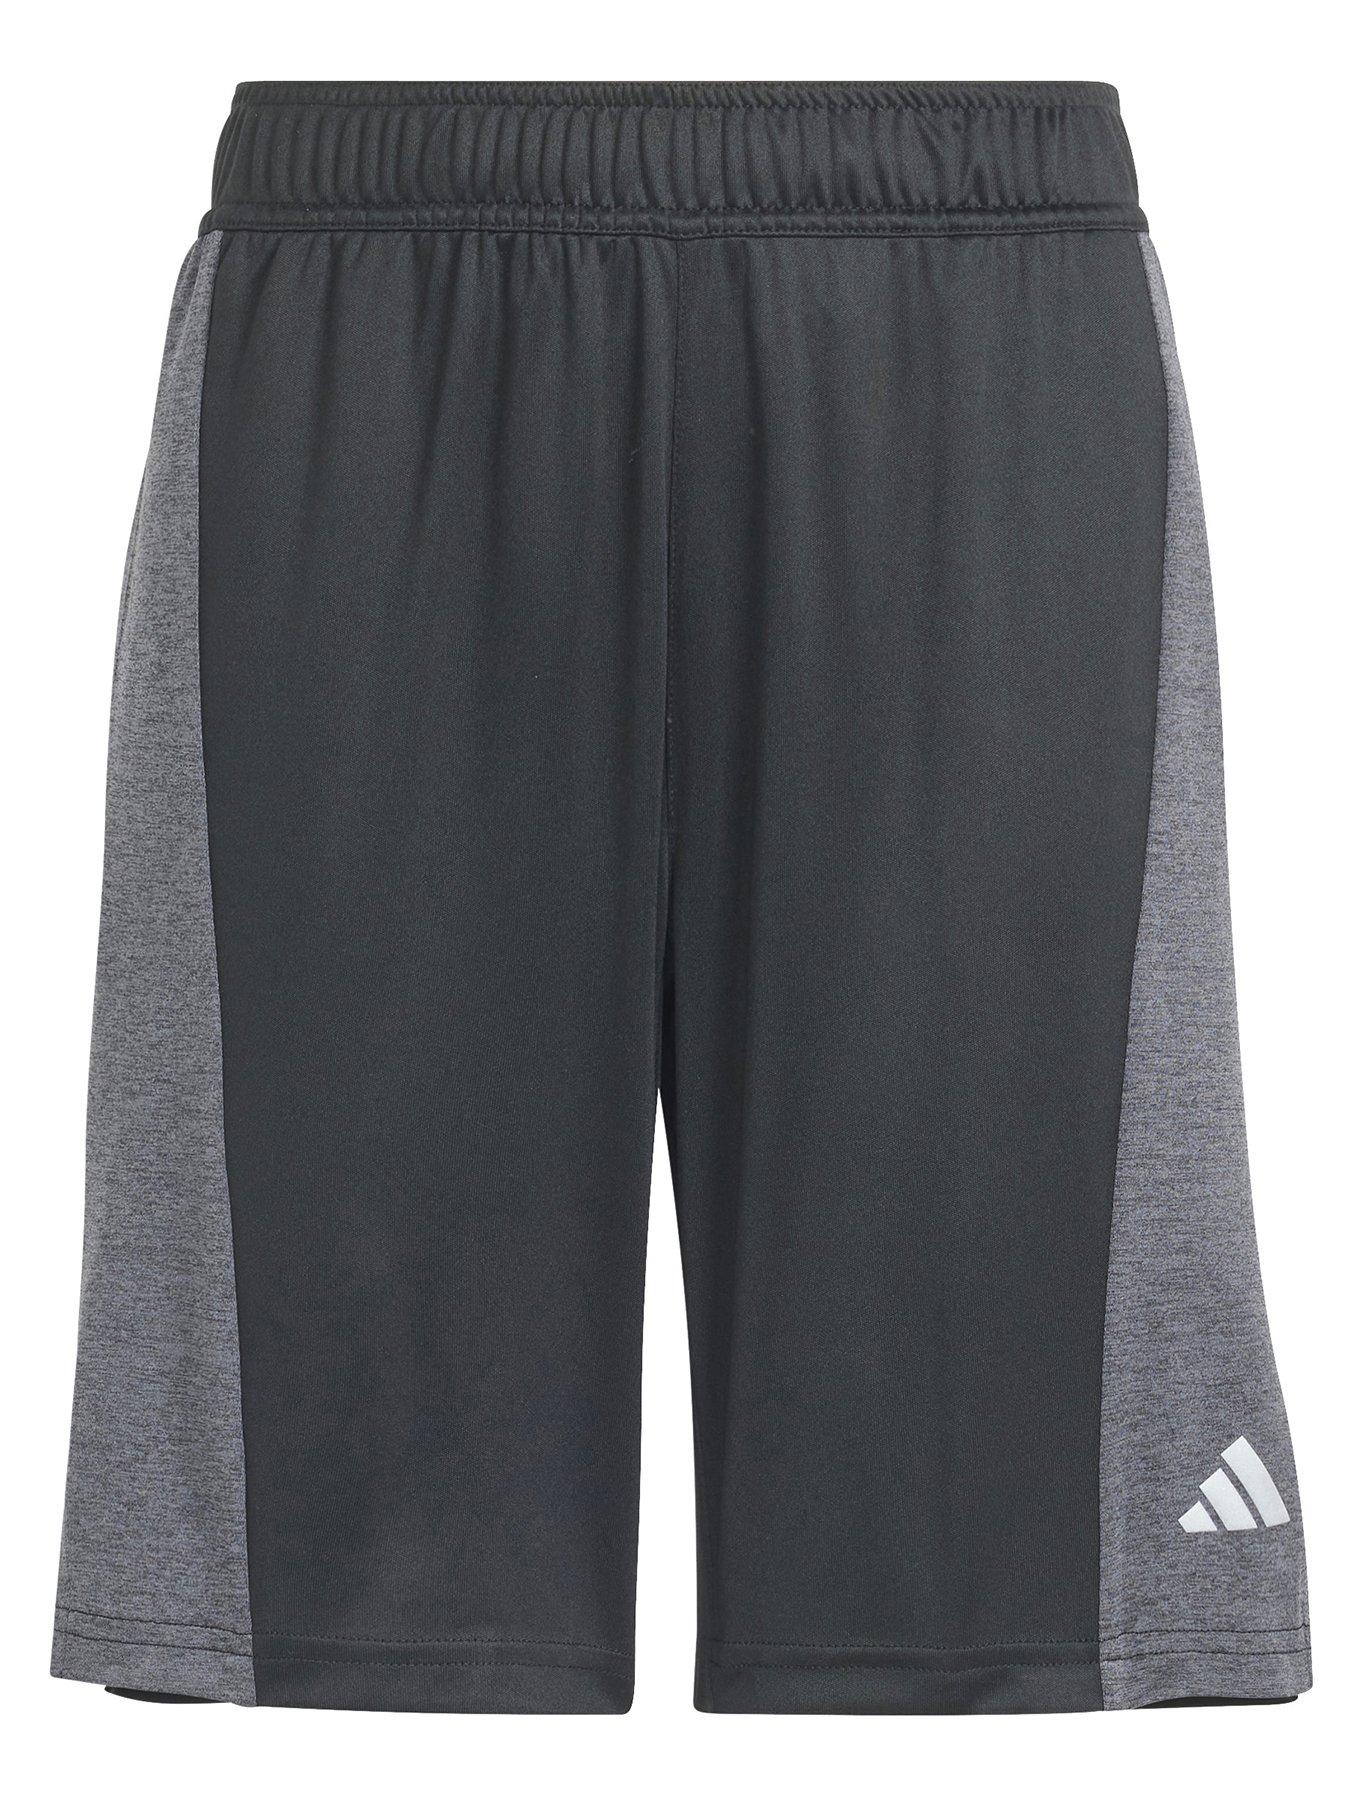 UNDER ARMOUR Boys Challenger Knit Shorts - Black/White